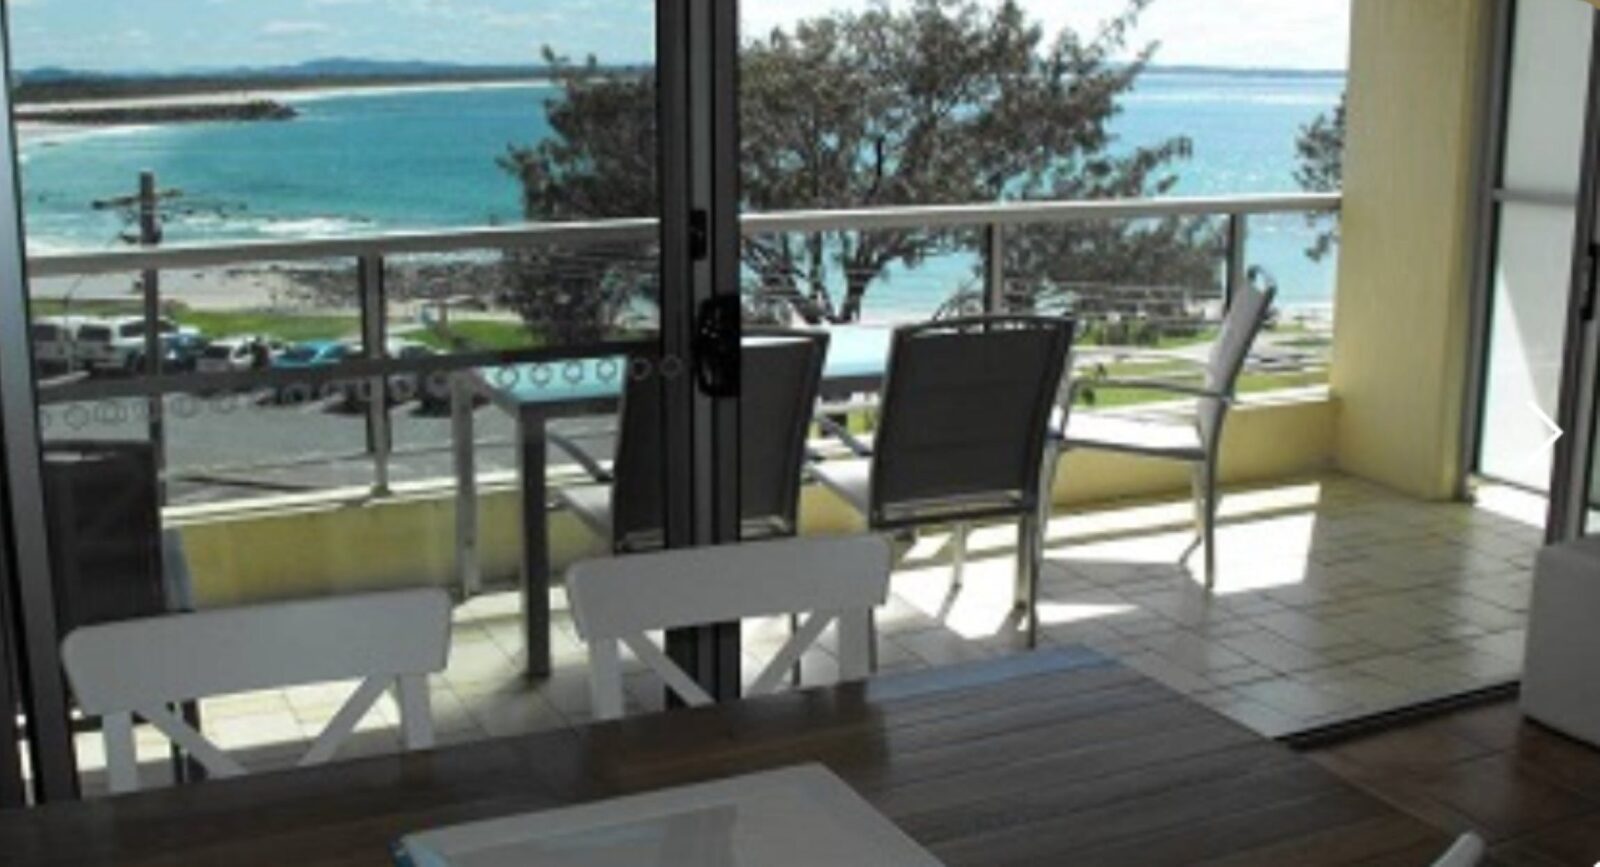 Dining area, looking out to balcony, outdoor setting and ocean views